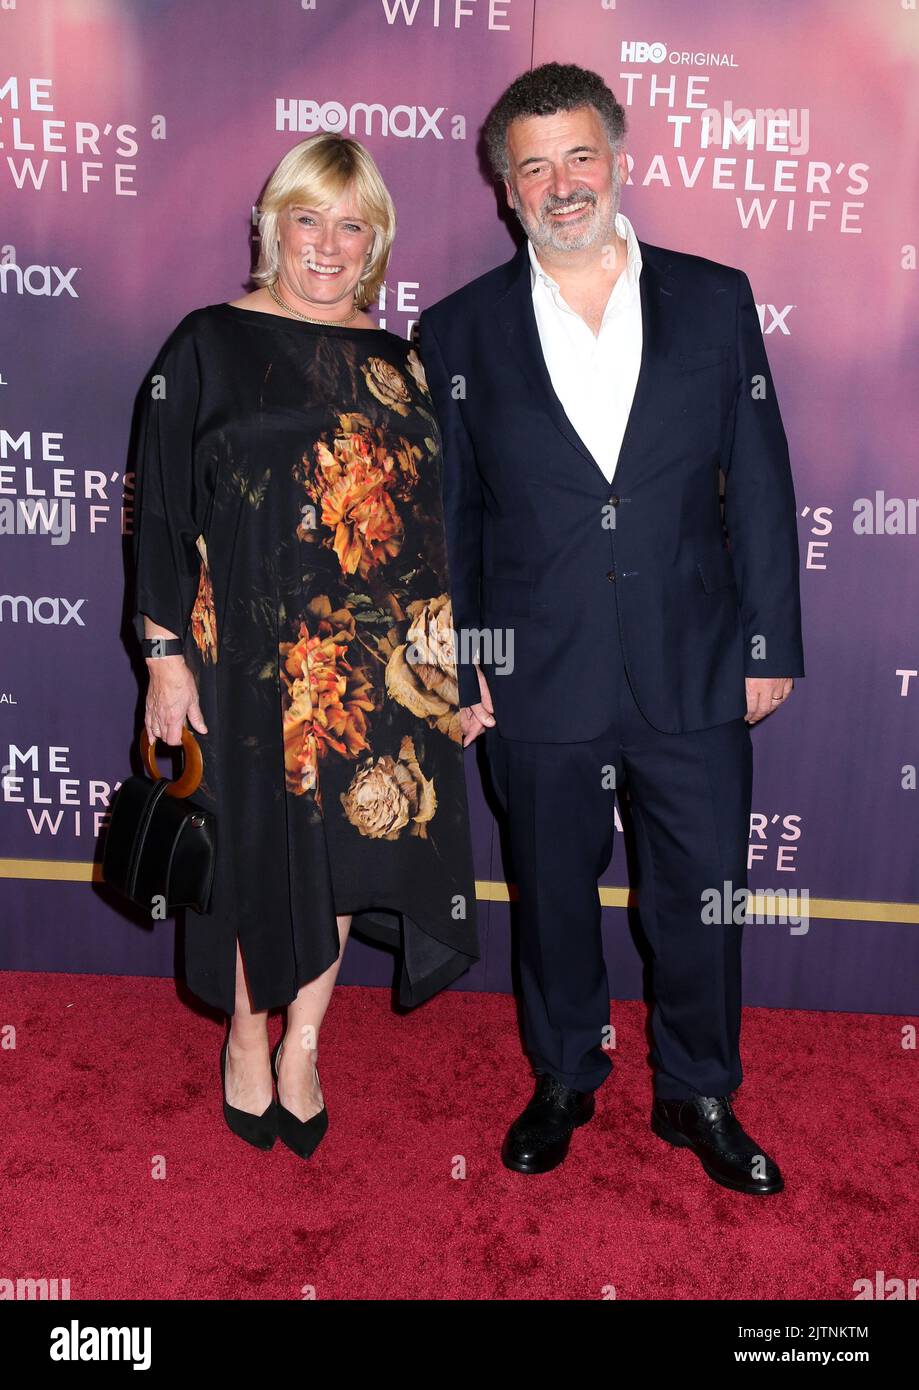 Sue Vertue and Steven Moffat attending HBO's 'The Time Traveler's Wife' Premiere held at the Morgan Library on May 11, 2022 in New York City, NY ©Steven Bergman/AFF-USA.COM Stock Photo